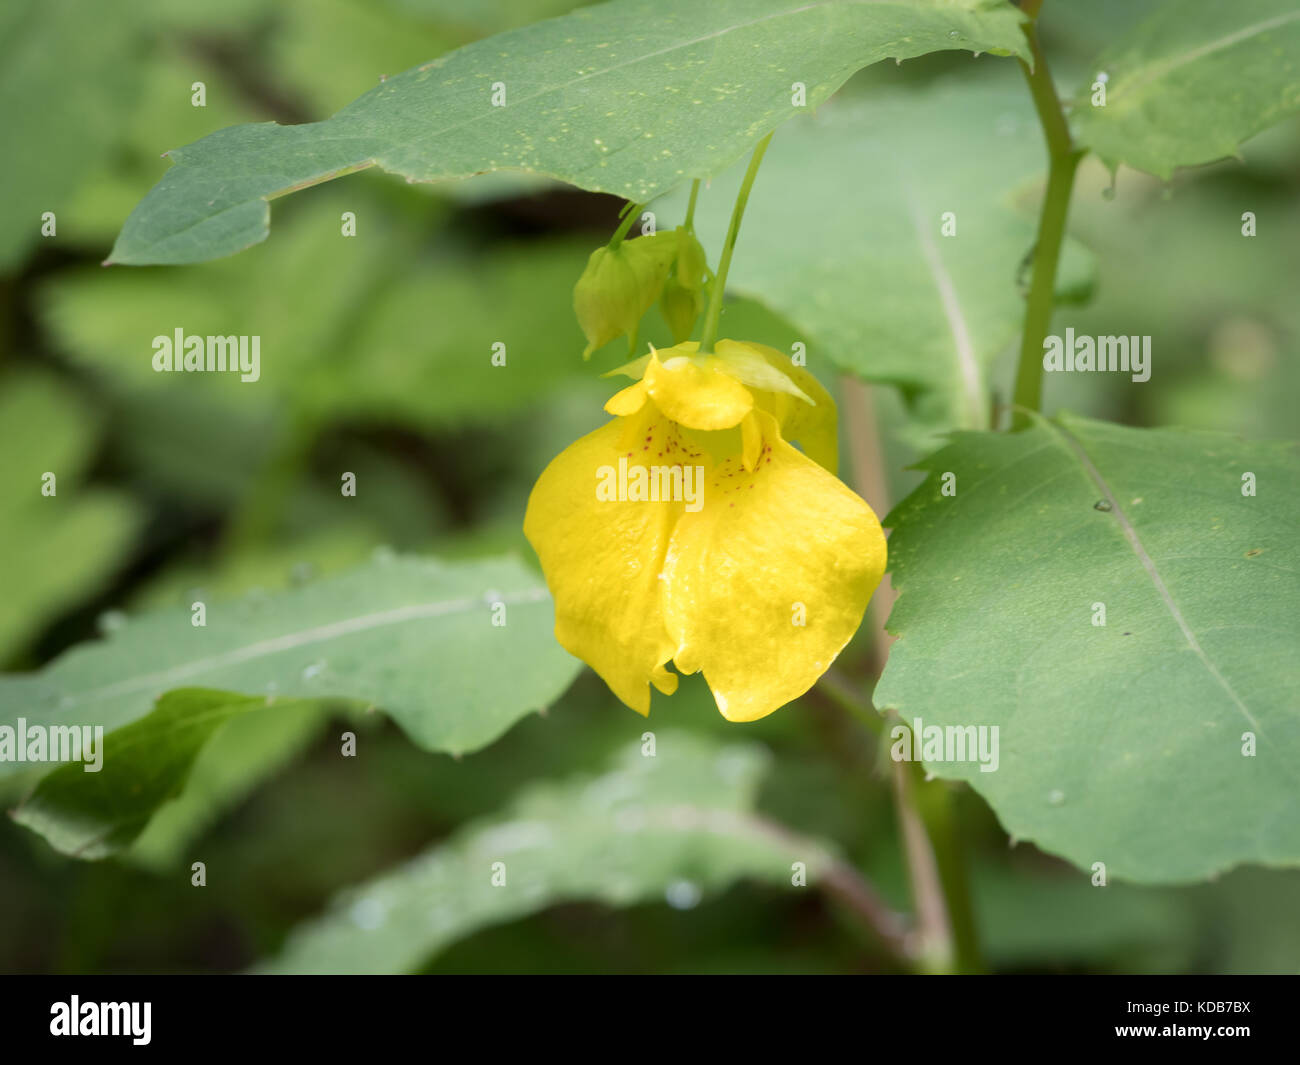 Flower closeup of a touch-me-not balsam (Impatiens noli-tangere) green leaves Stock Photo